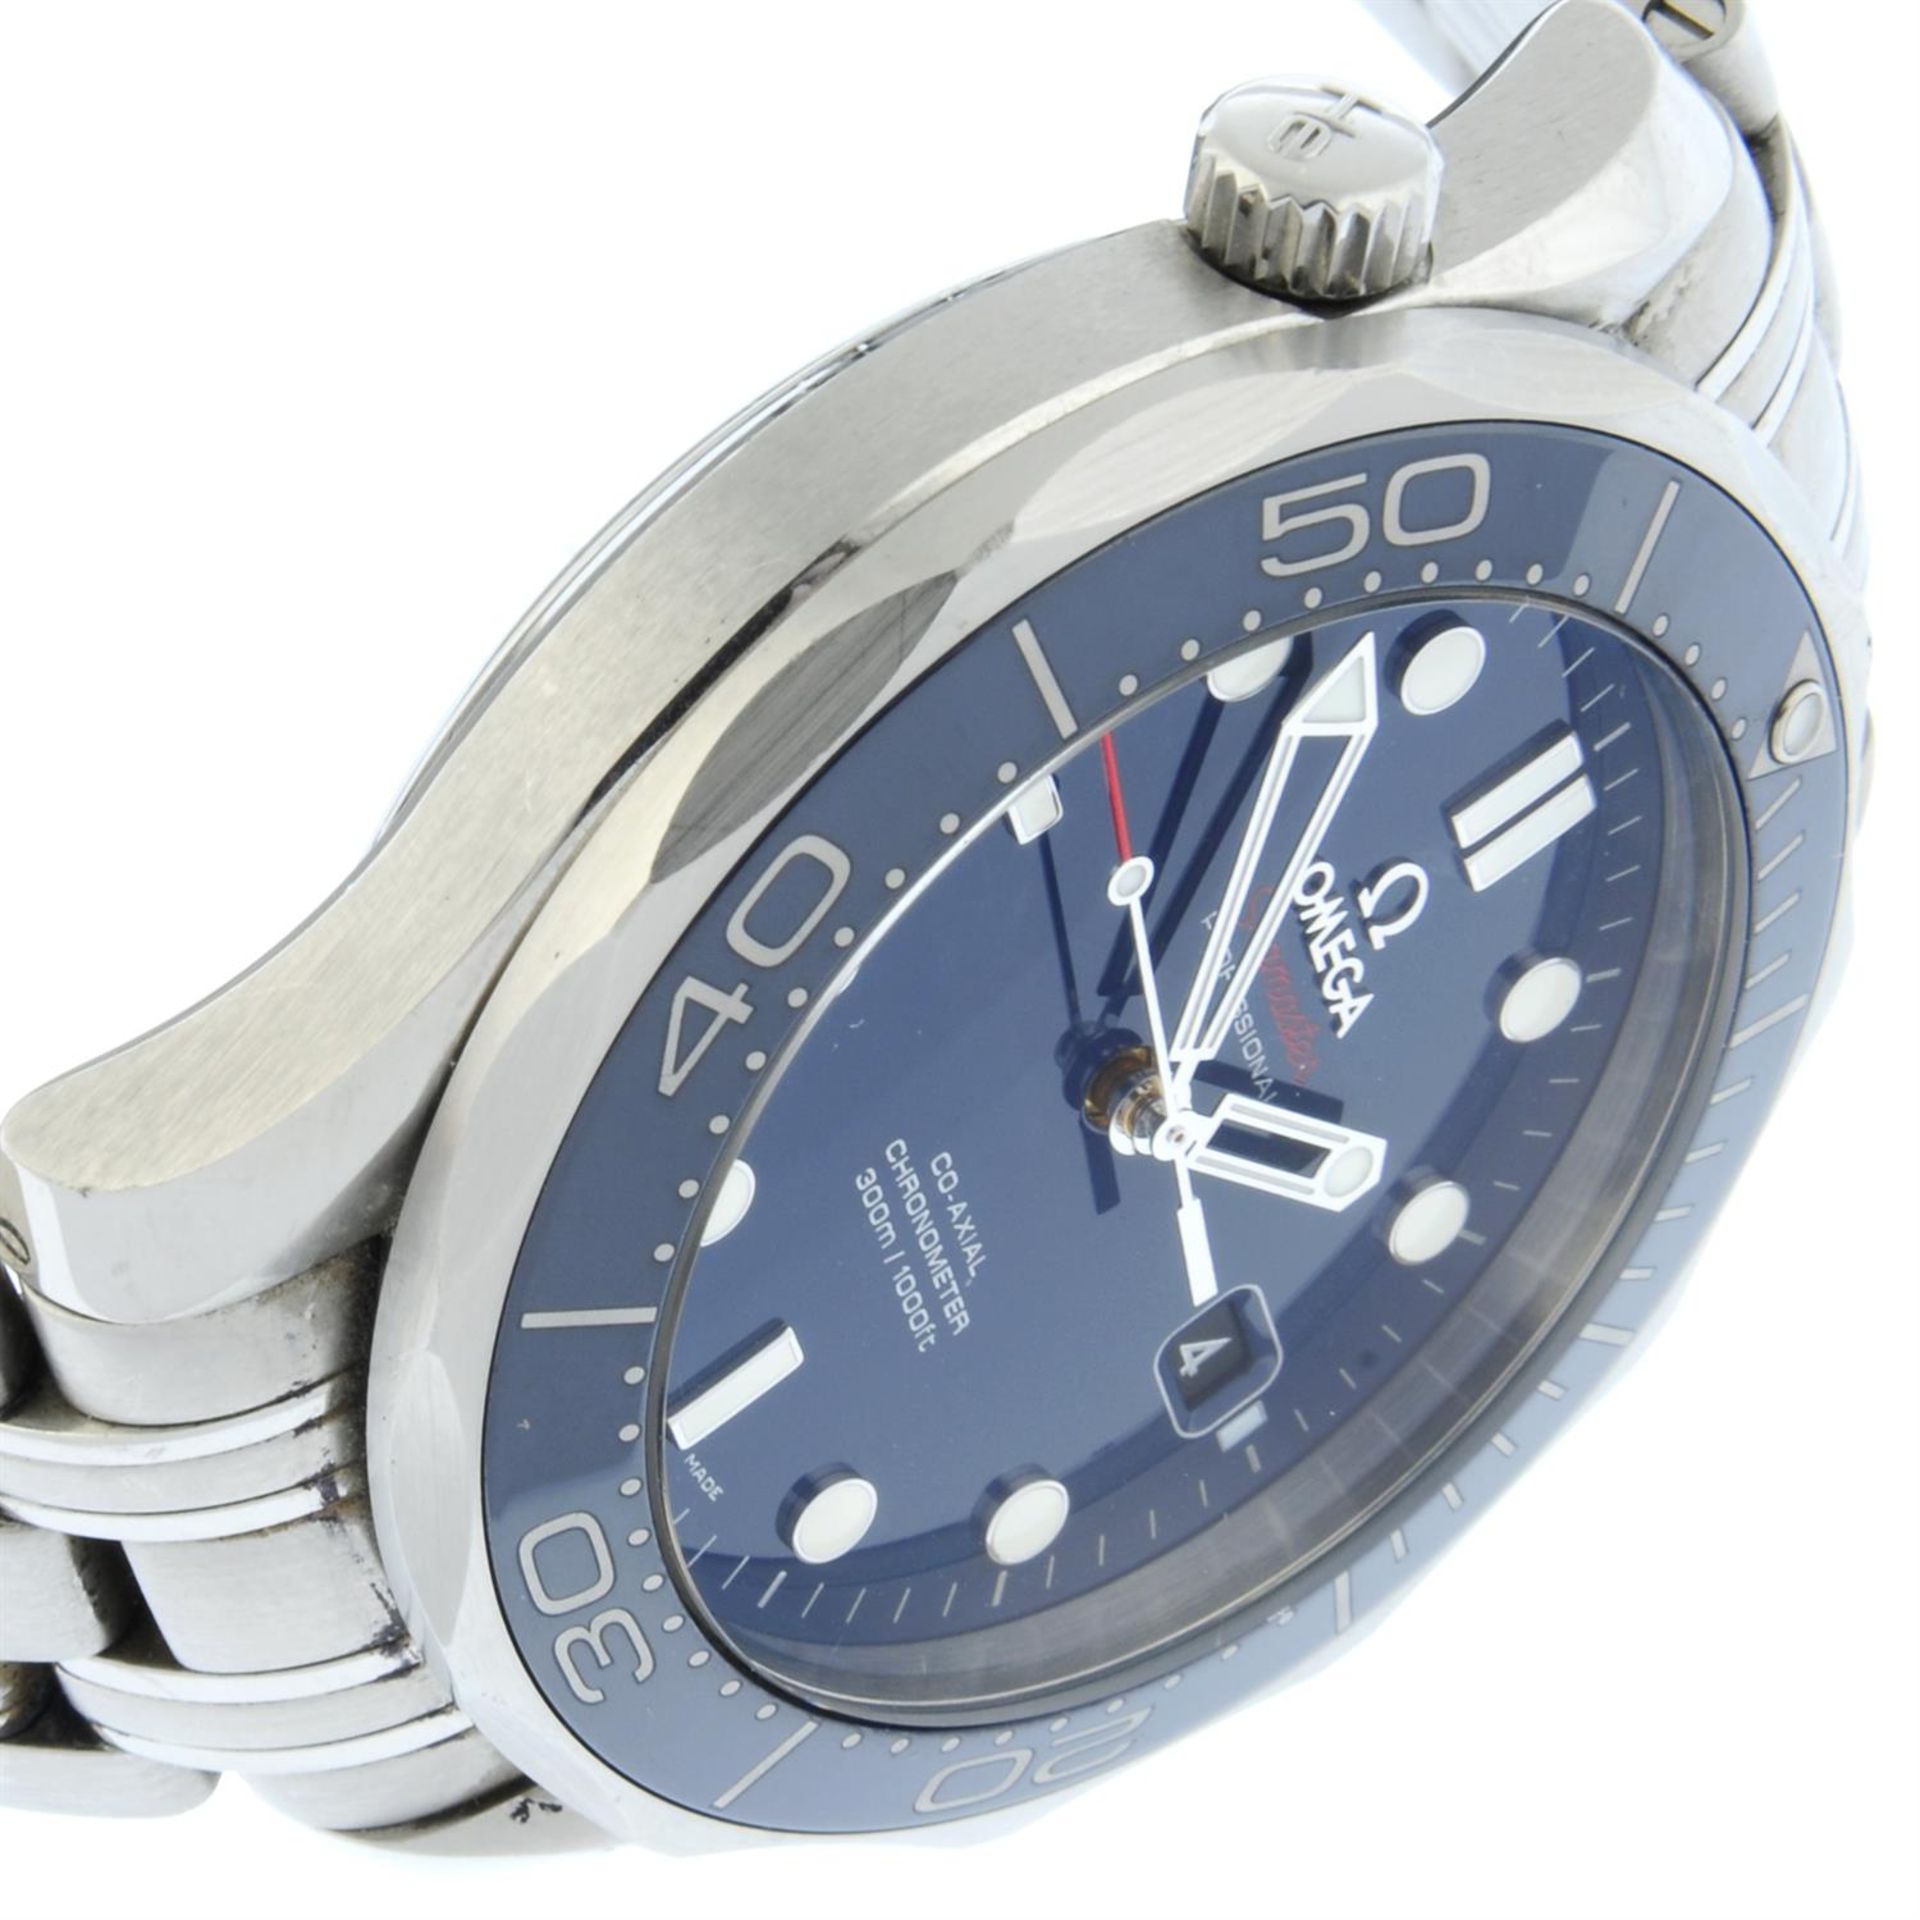 Omega - a Seamaster Co-Axial watch, 42mm. - Image 4 of 6